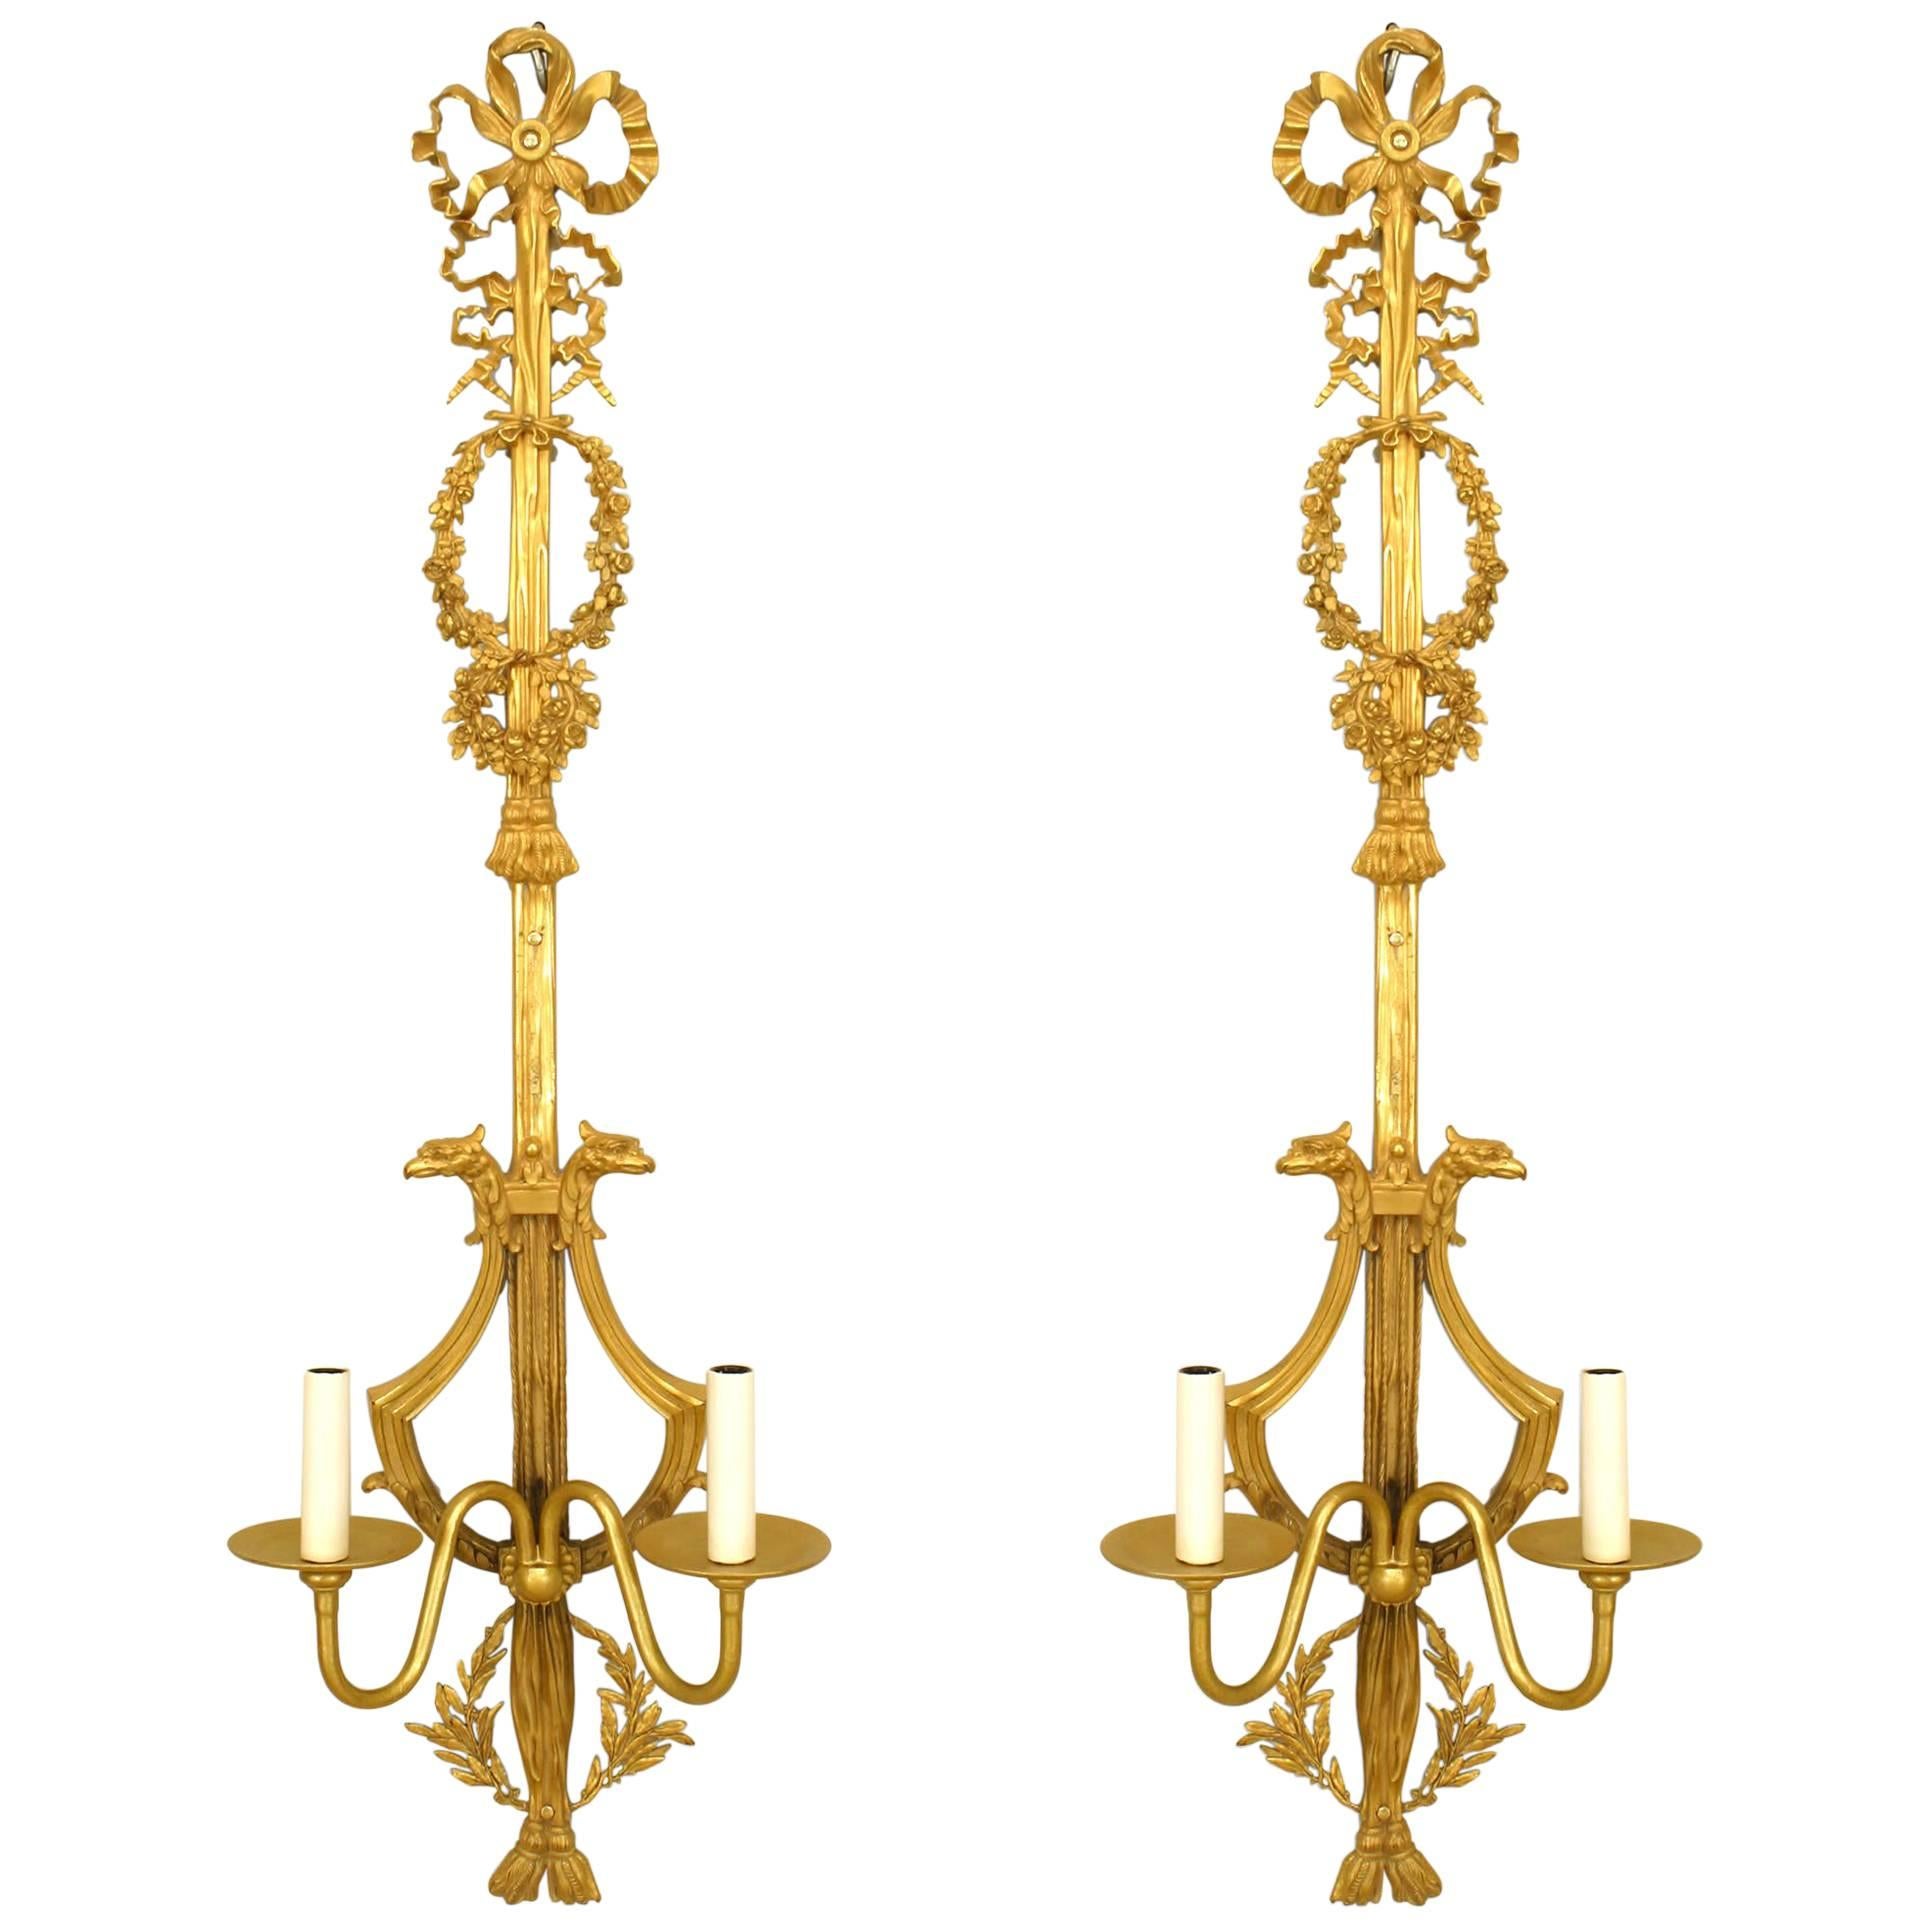 Pair of French Louis XVI Style Gilt Wall Sconces For Sale